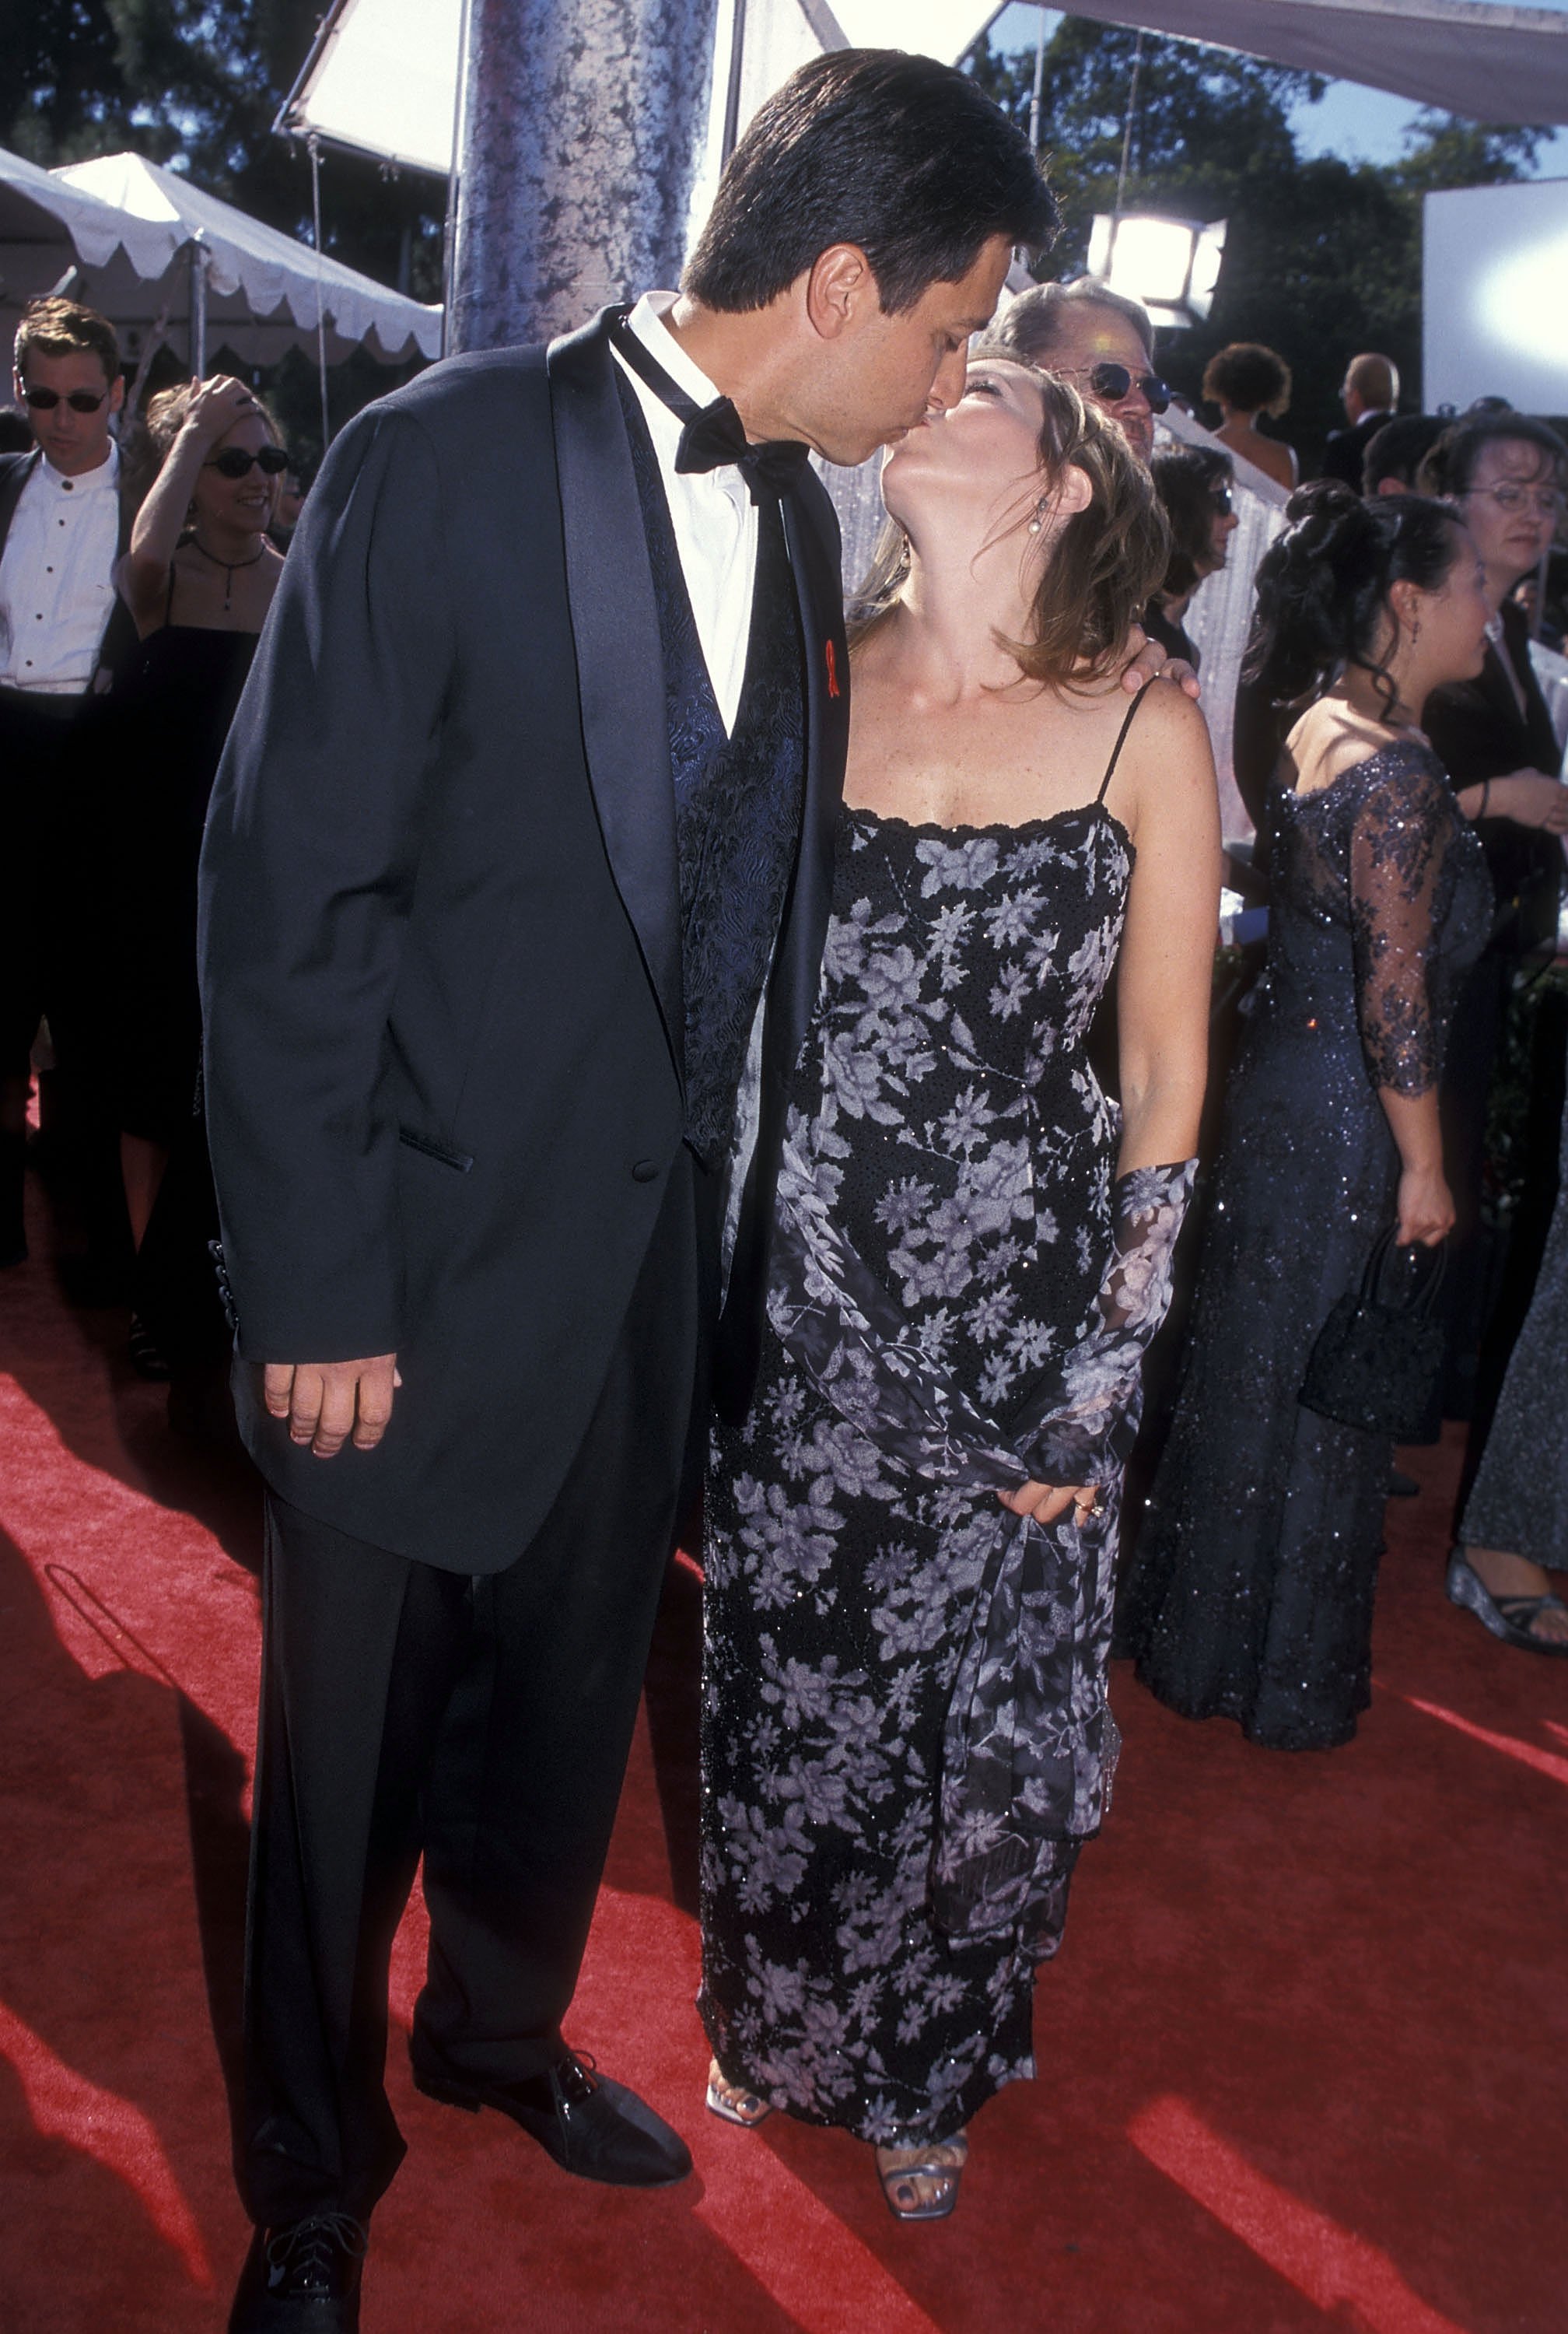 Ray Romano and wife Anna at the Shrine Auditorium in Los Angeles, California, September 12, 1999 | Source: Getty Images